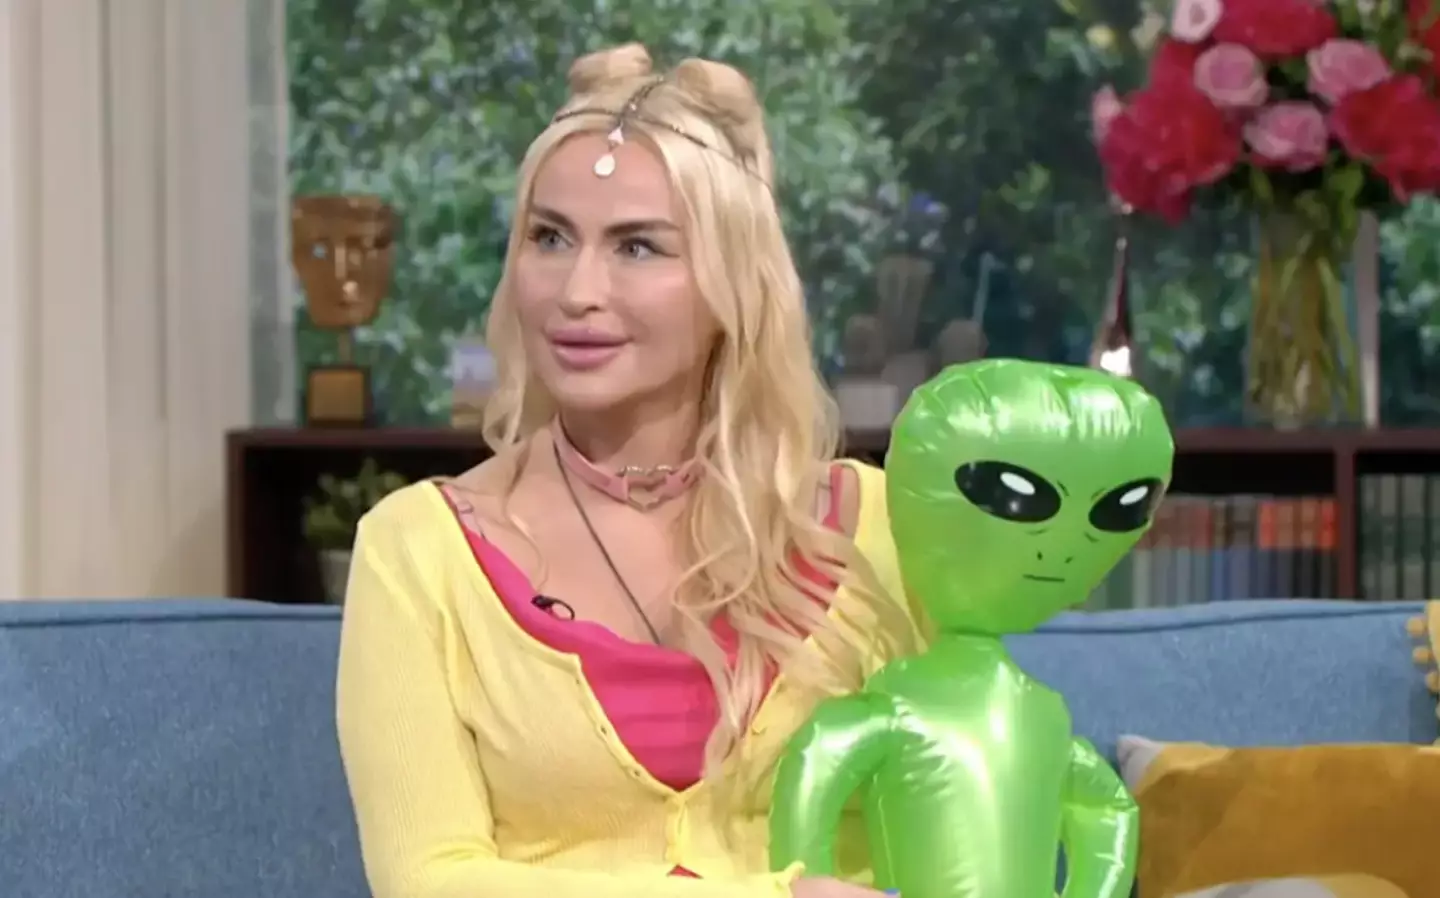 Rose said that the inflatable was a stand-in for her alien boyfriend.